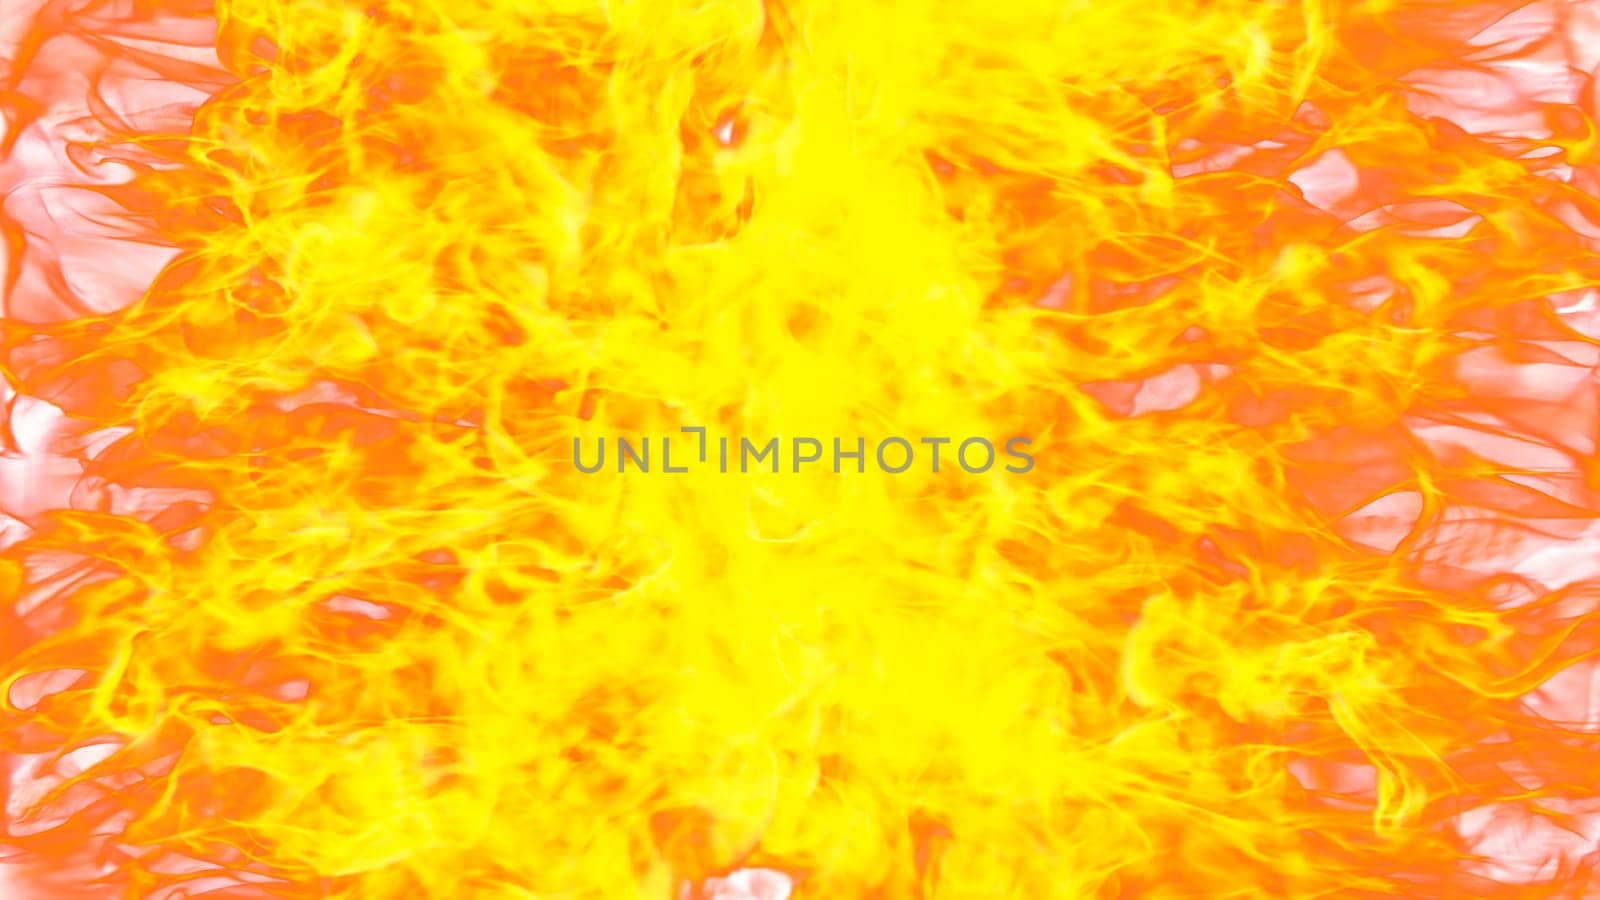 3d illustration. Flame flare on white background. by mrwed54